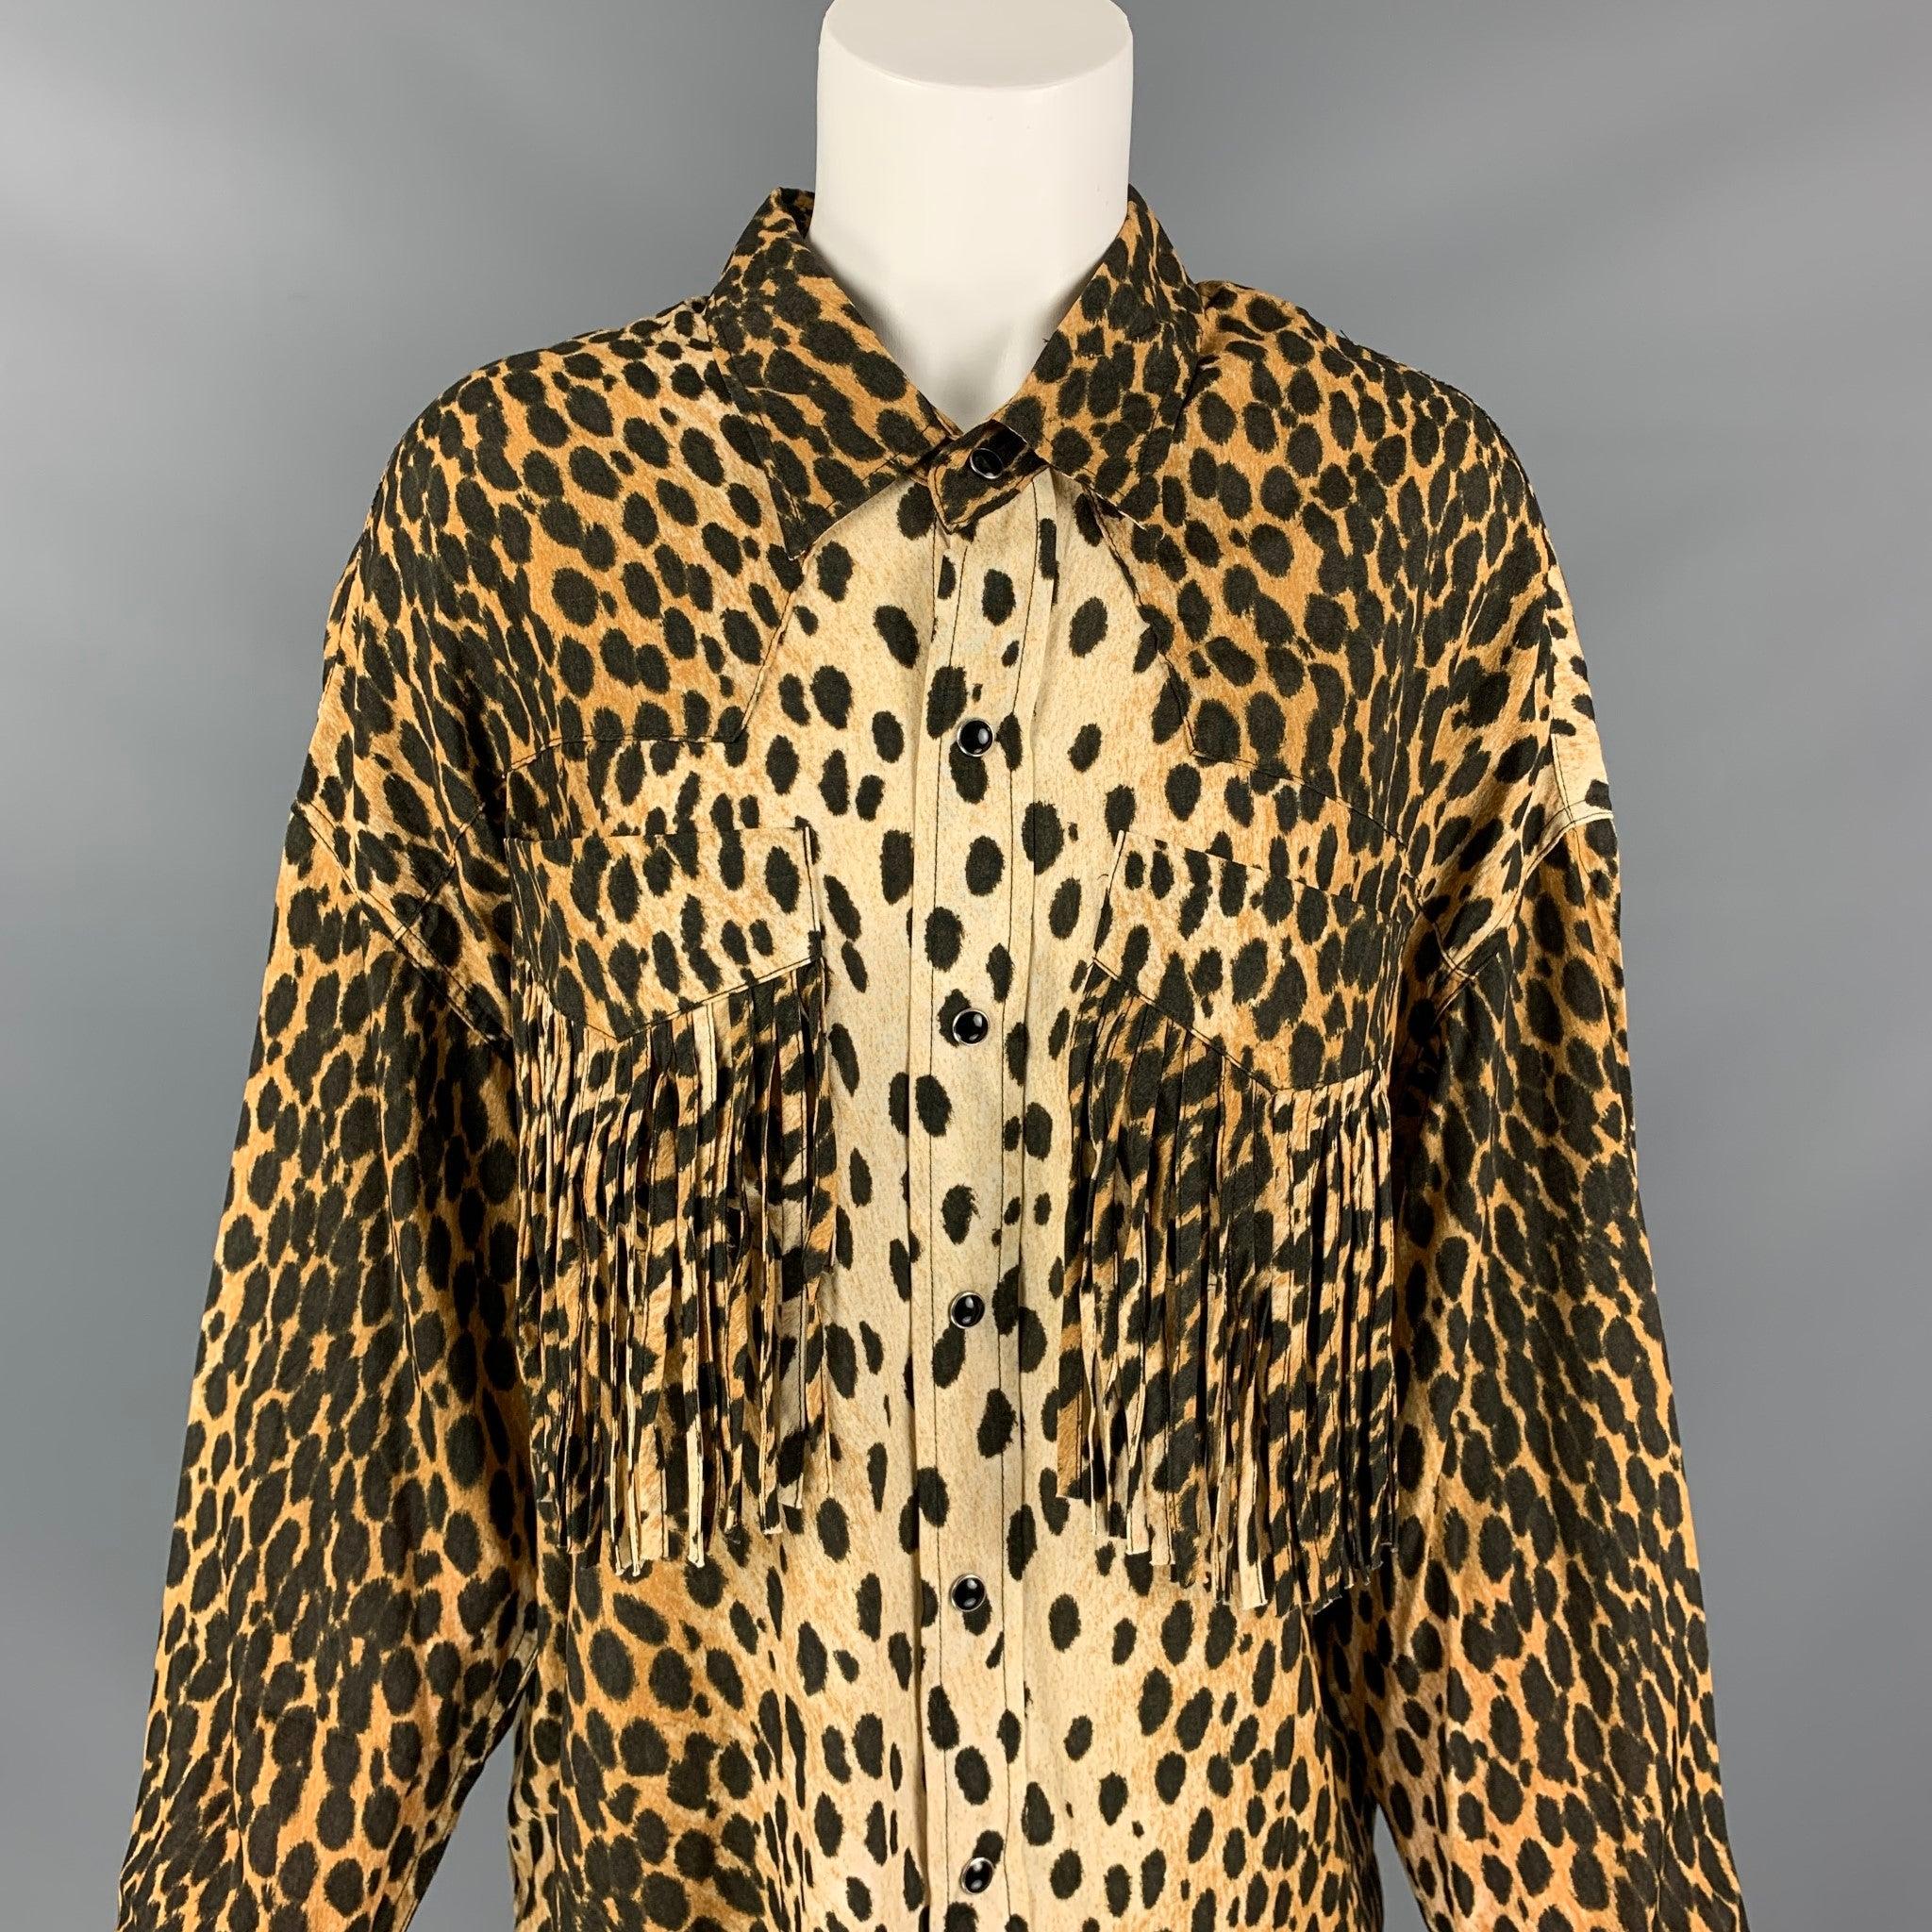 R13 shirt comes in a tan & brown animal print cotton featuring a western style, front fringe trim pockets, pointed collar, oversized fit, curved hem, and a snap button closure.
New With Tags.
 

Marked:   XS 

Measurements: 
 
Shoulder: 24 inches